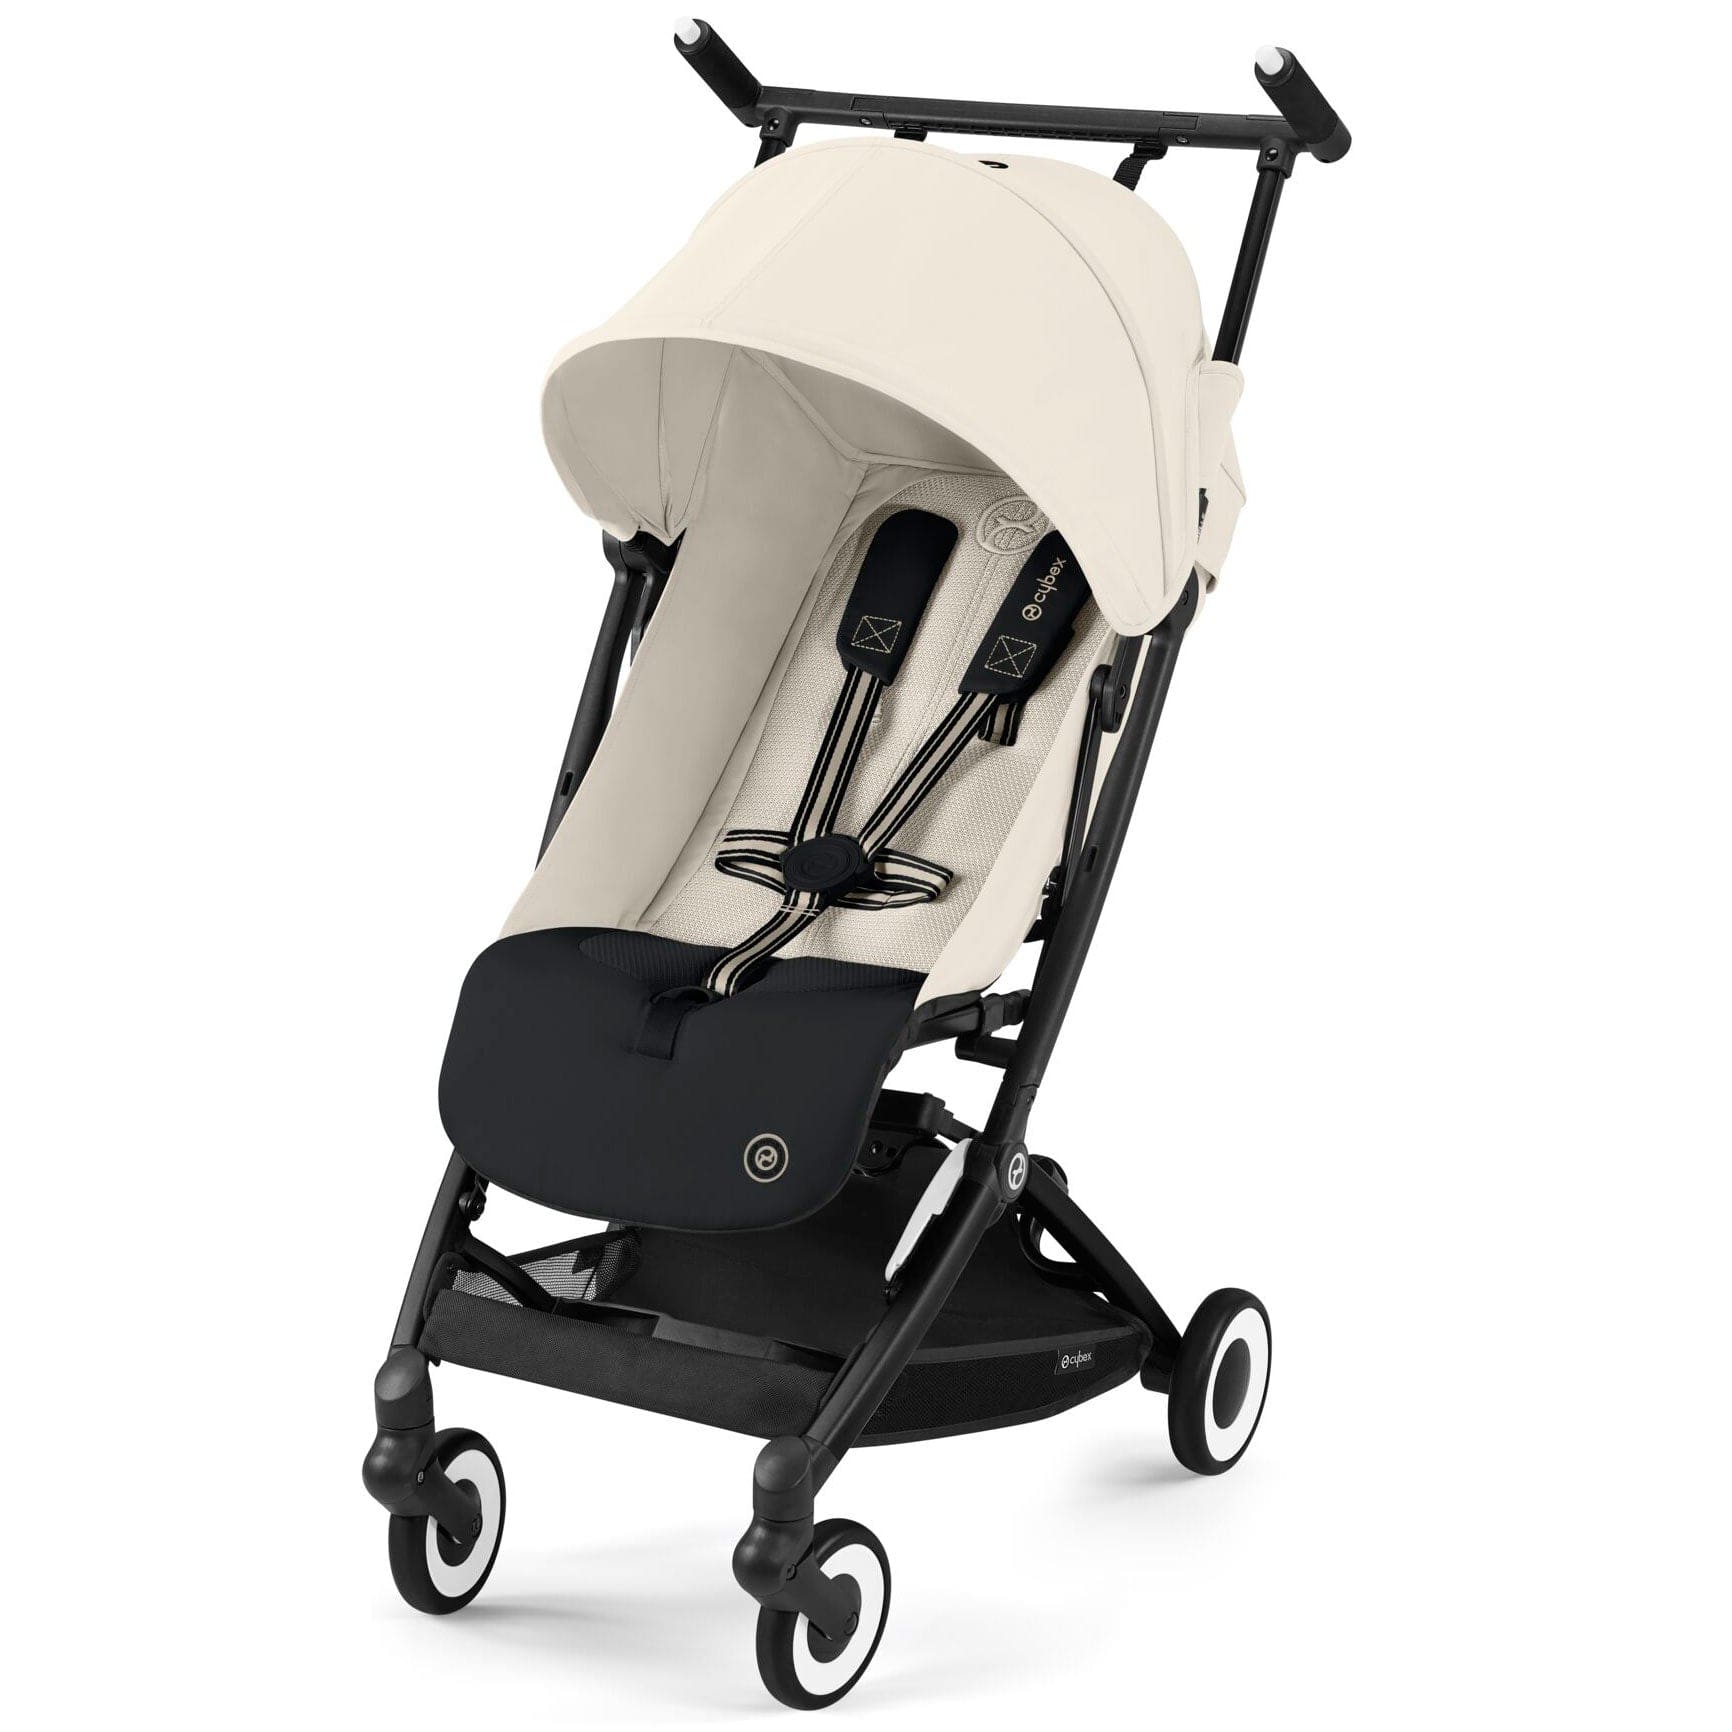 Cybex Libelle in Canvas White Pushchairs & Buggies 524000279 4063846451609